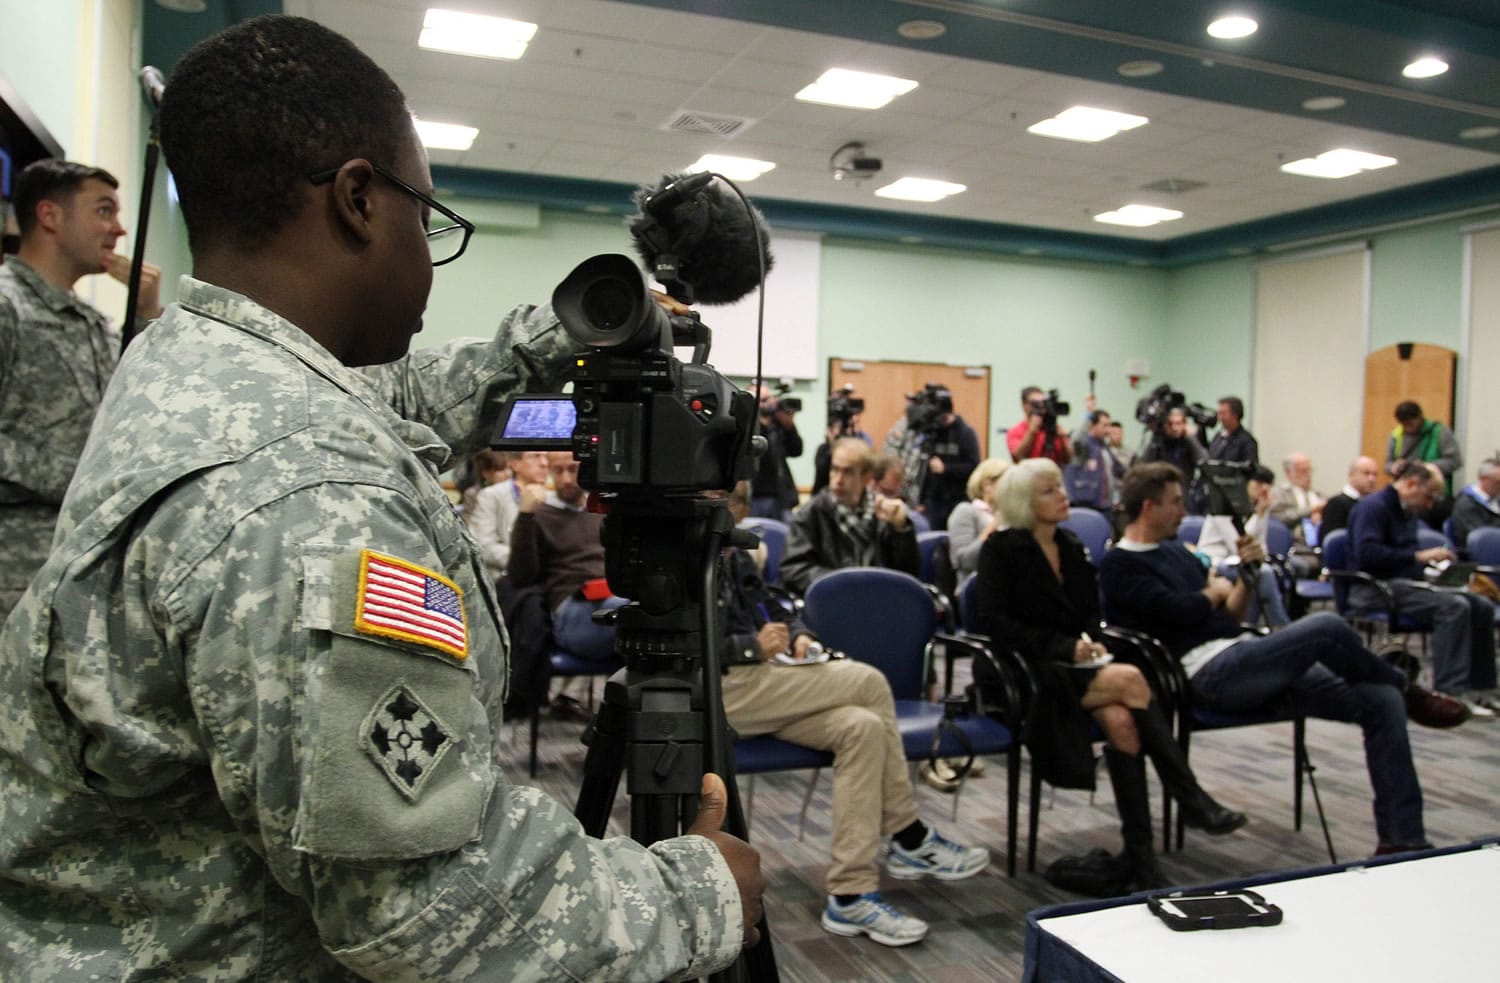 Journalist listen as Major General Darryl A. Williams, the commanding general of U.S. Army Africa, conducts a press conference via video teleconferencing at the Camp Ederle U.S.